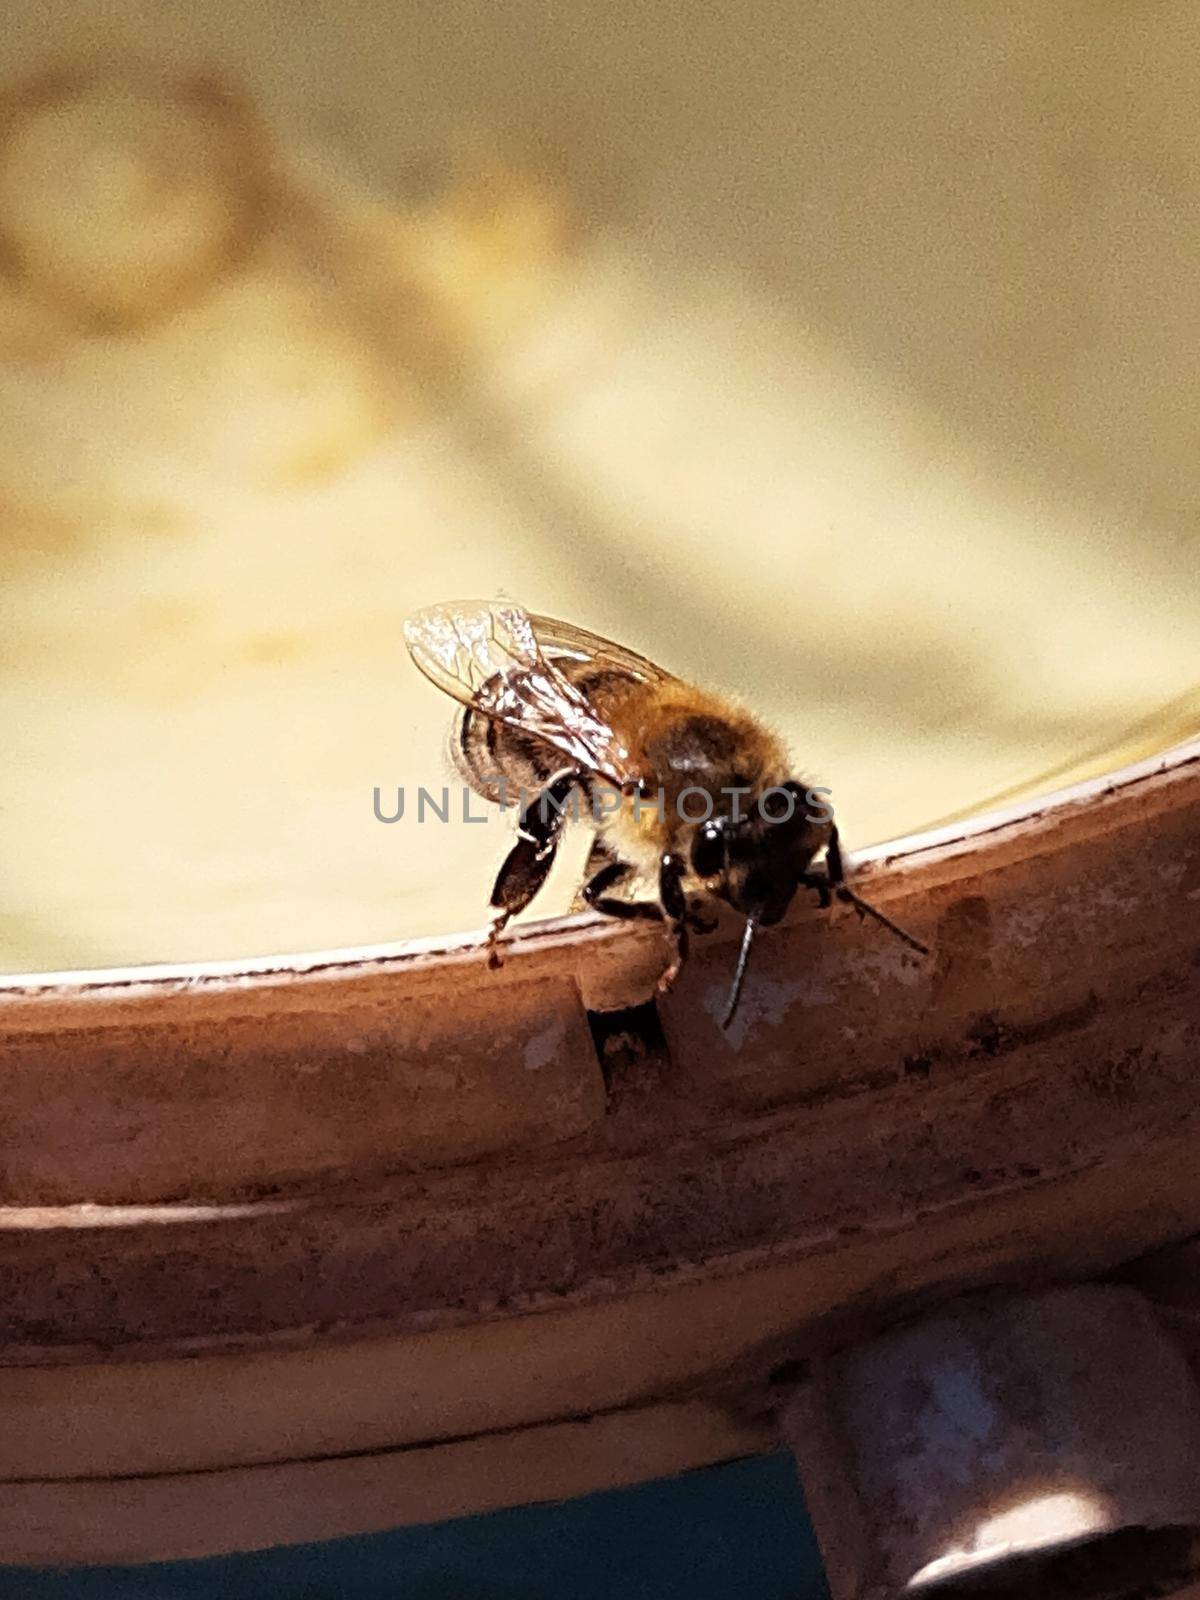 Bee on the edge of a saucer with water close-up.